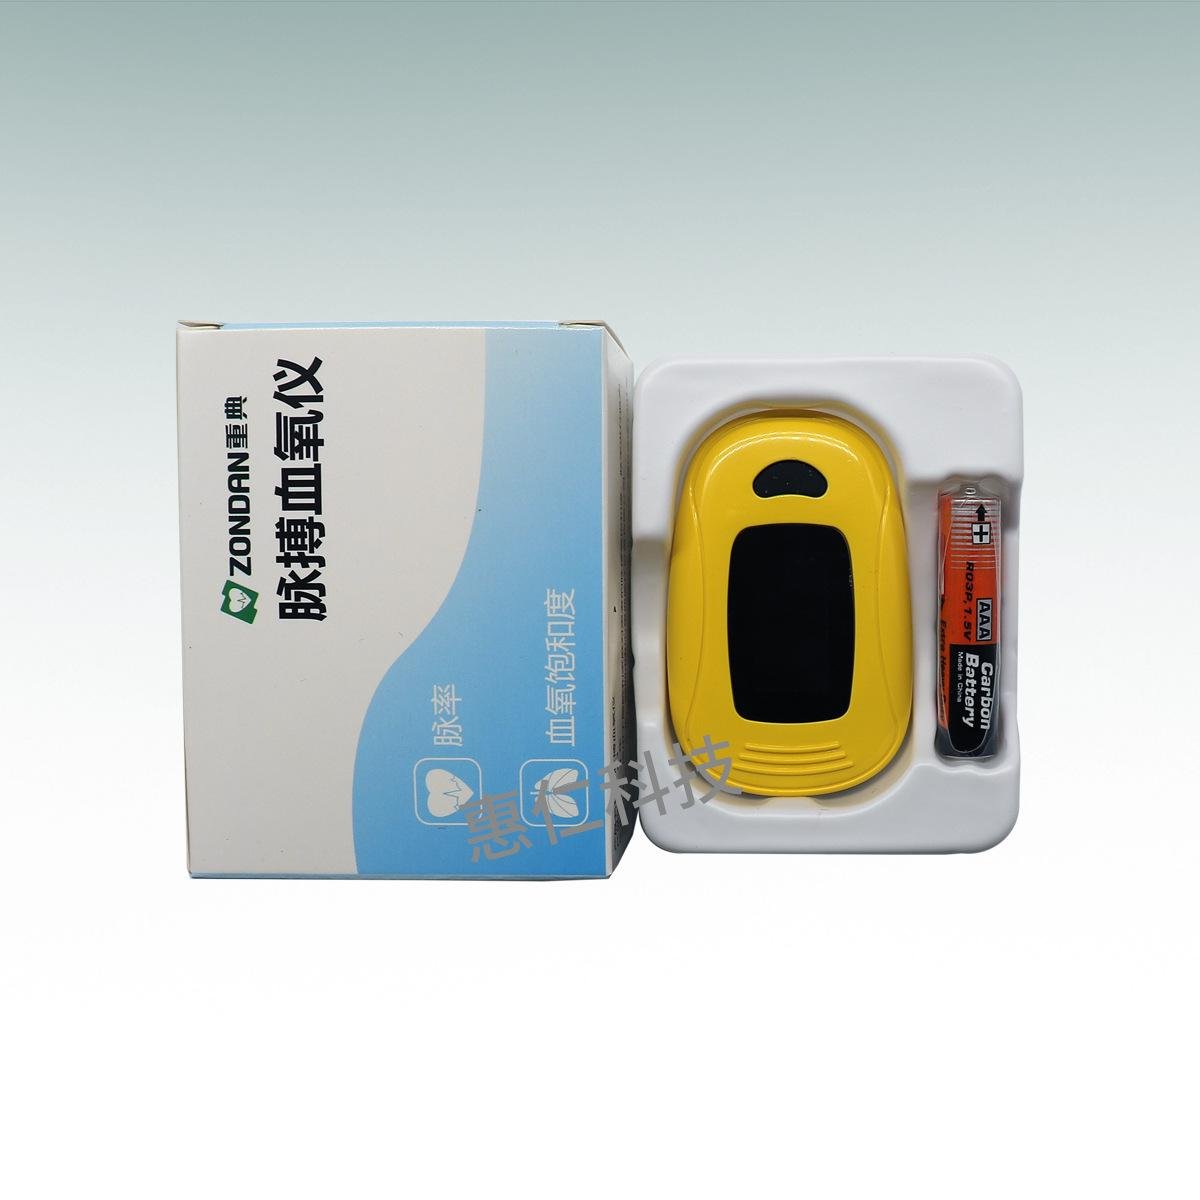 A3 With Alarm Pulse for Oximeter Fingertip TFT Display Oxymetre Pulse Meter 2